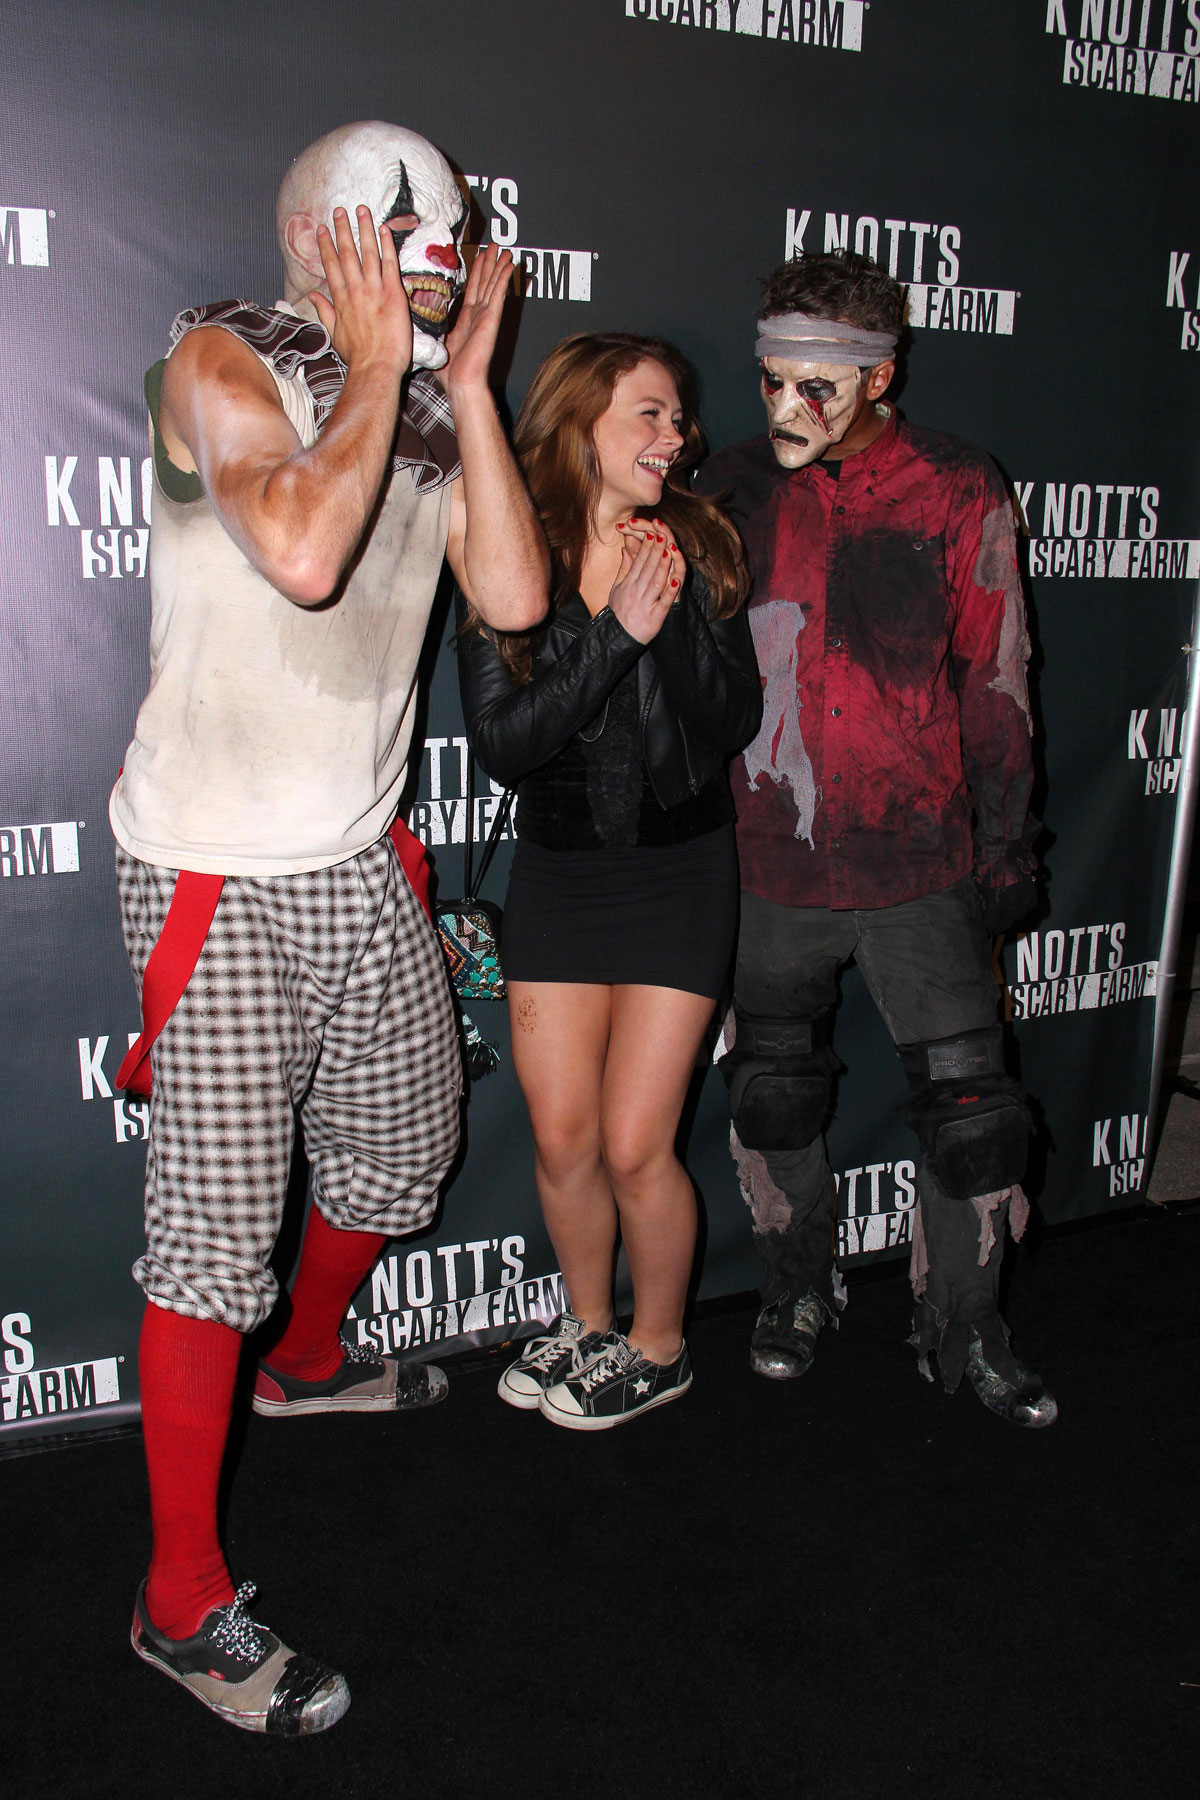 Natalie Alyn attends Lind Knotts Scary Farm Opening